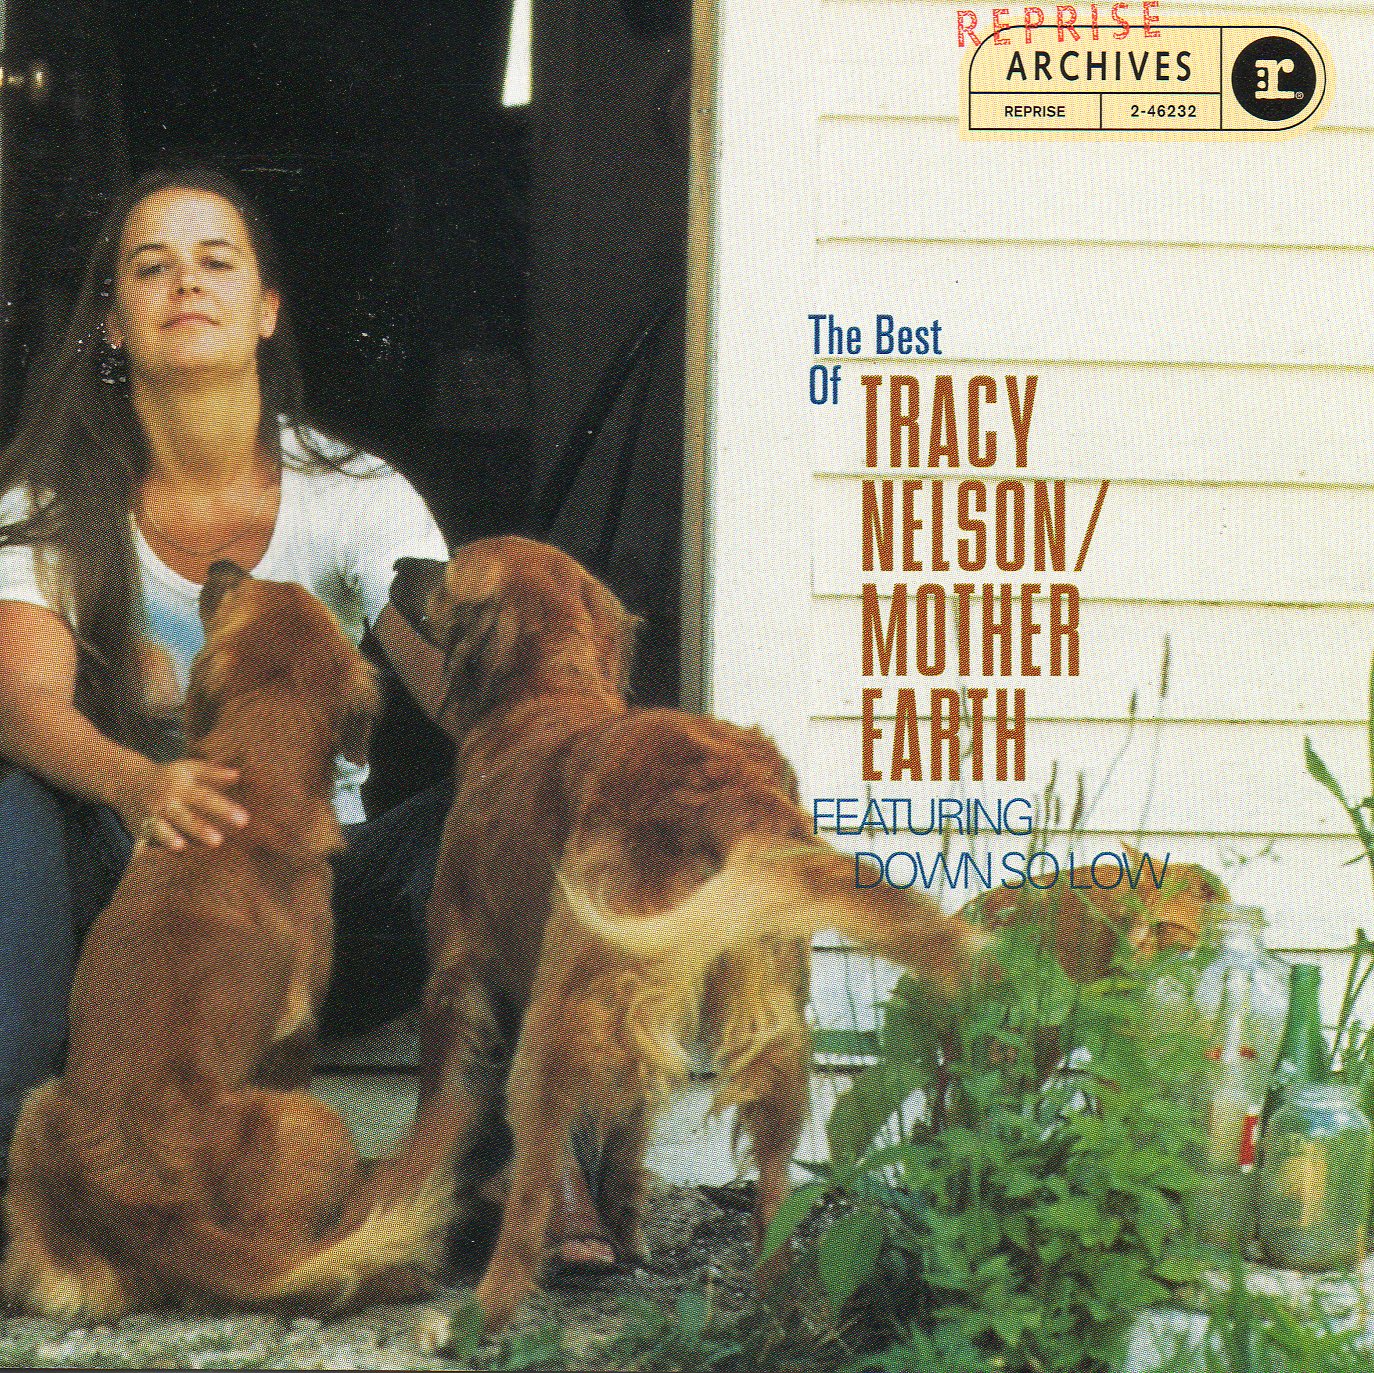 The Best of Tracy Nelson-Mother Earth 1996